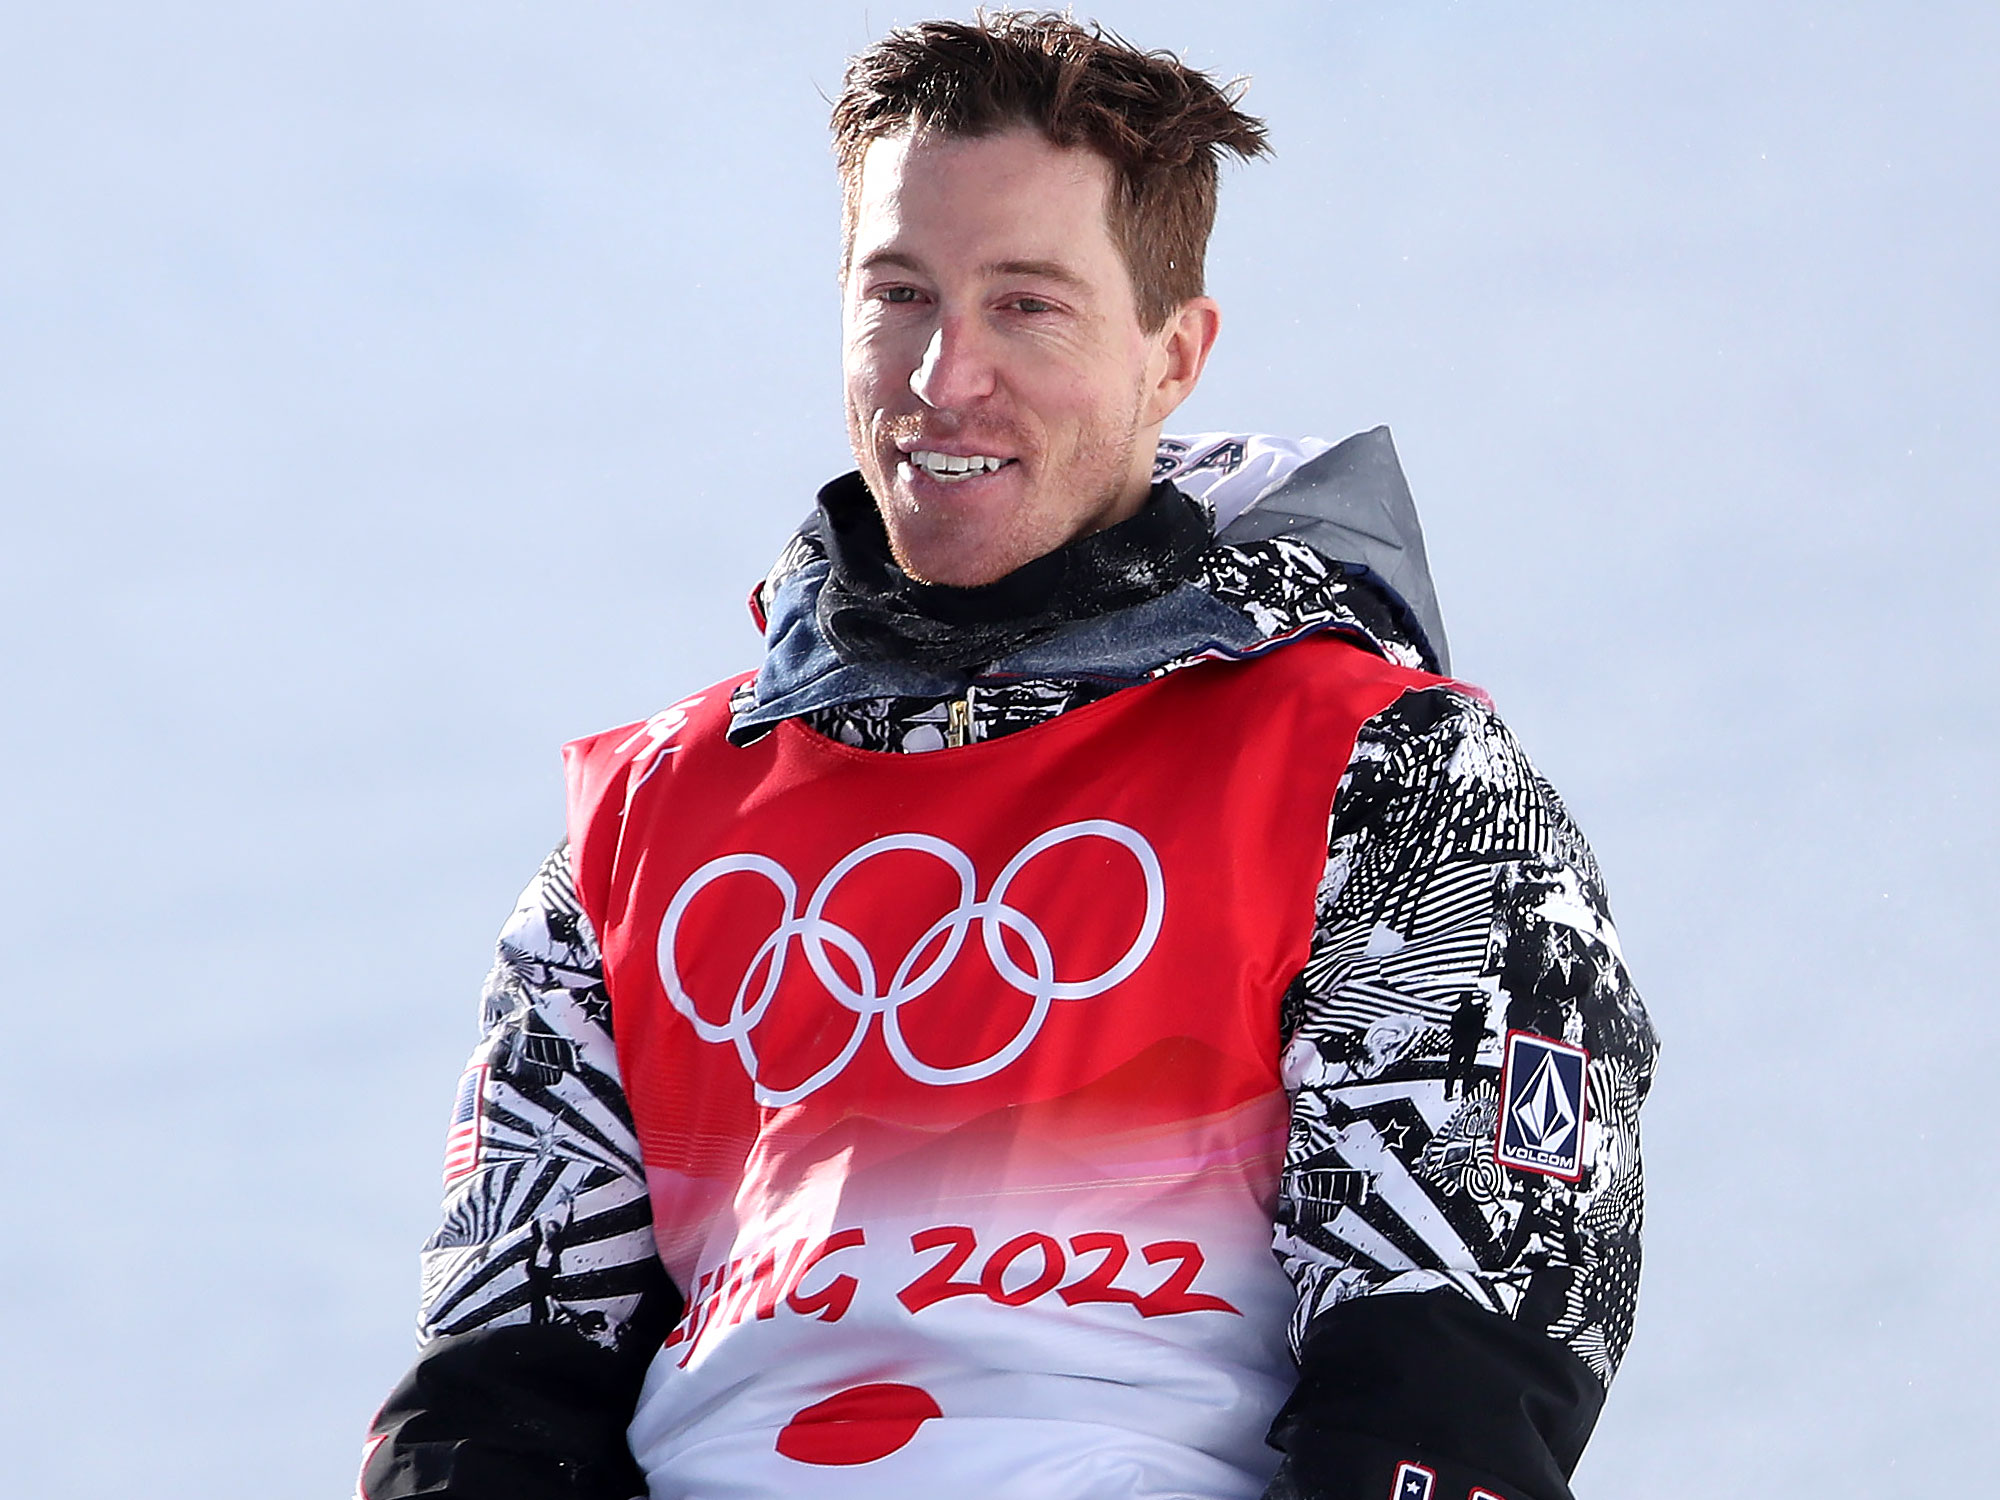 Tears of emotion as Shaun White bids farewell to competition in